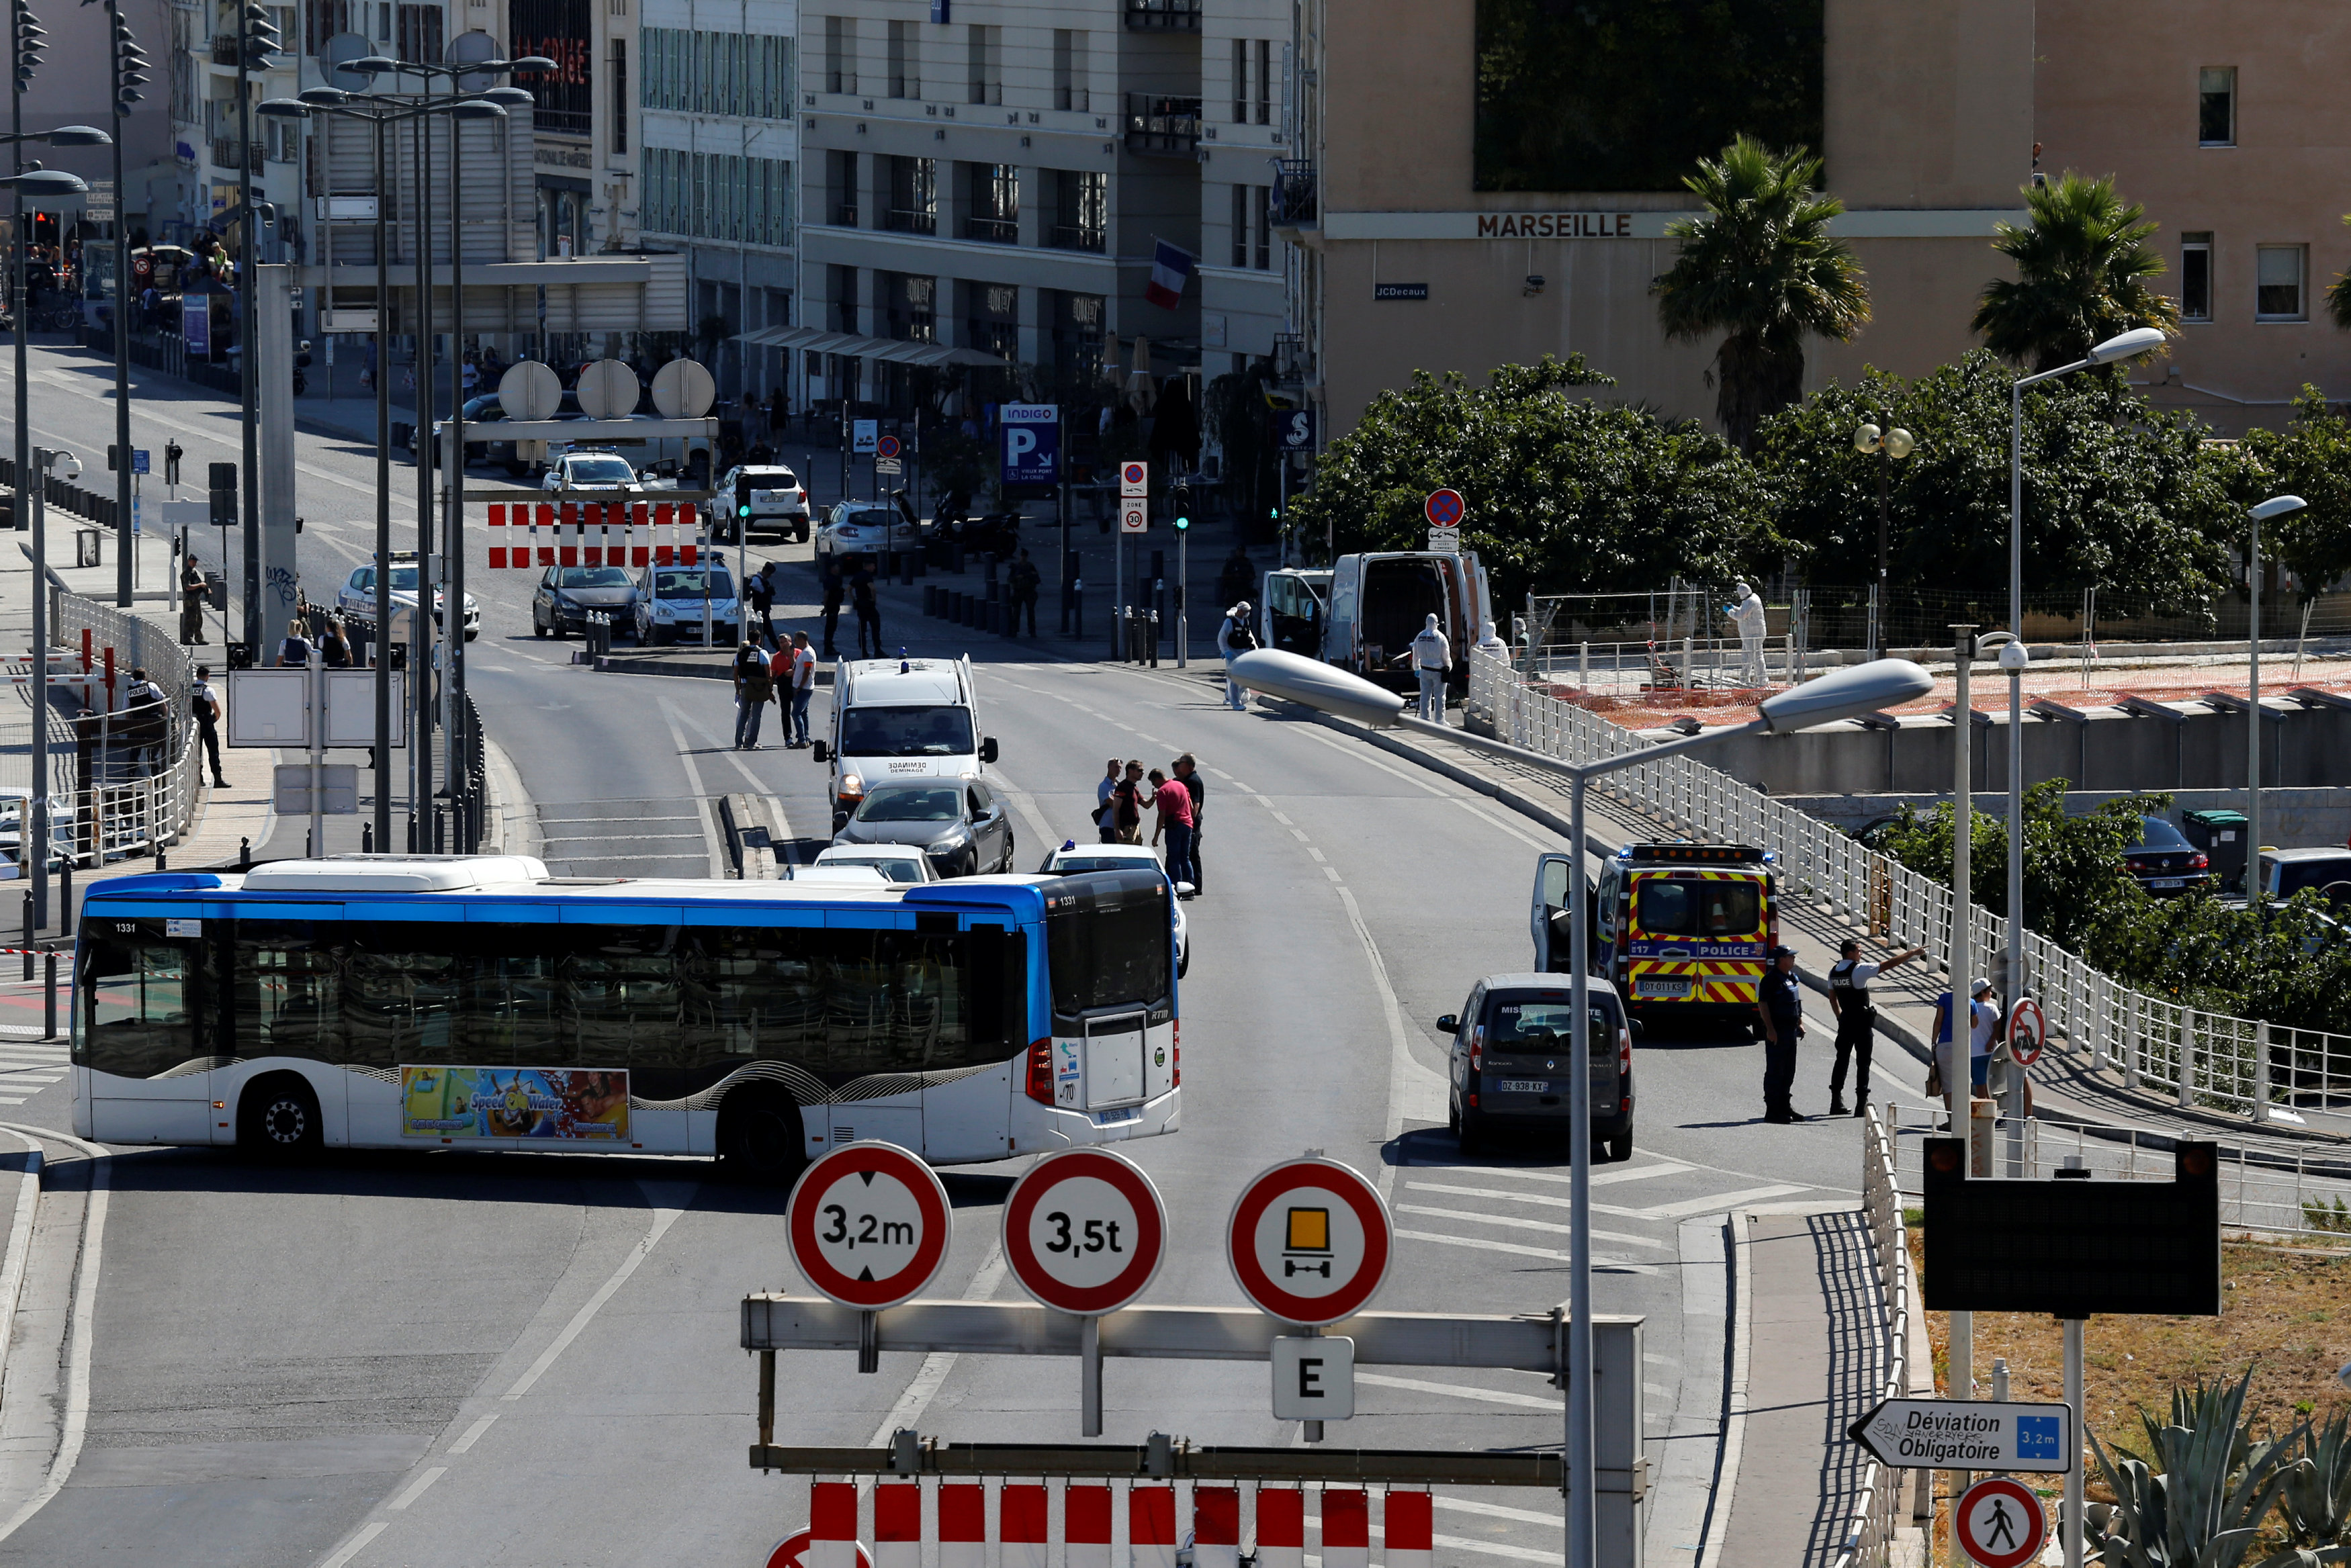 In pictures: Vehicle rams into bus shelters in Marseille, France